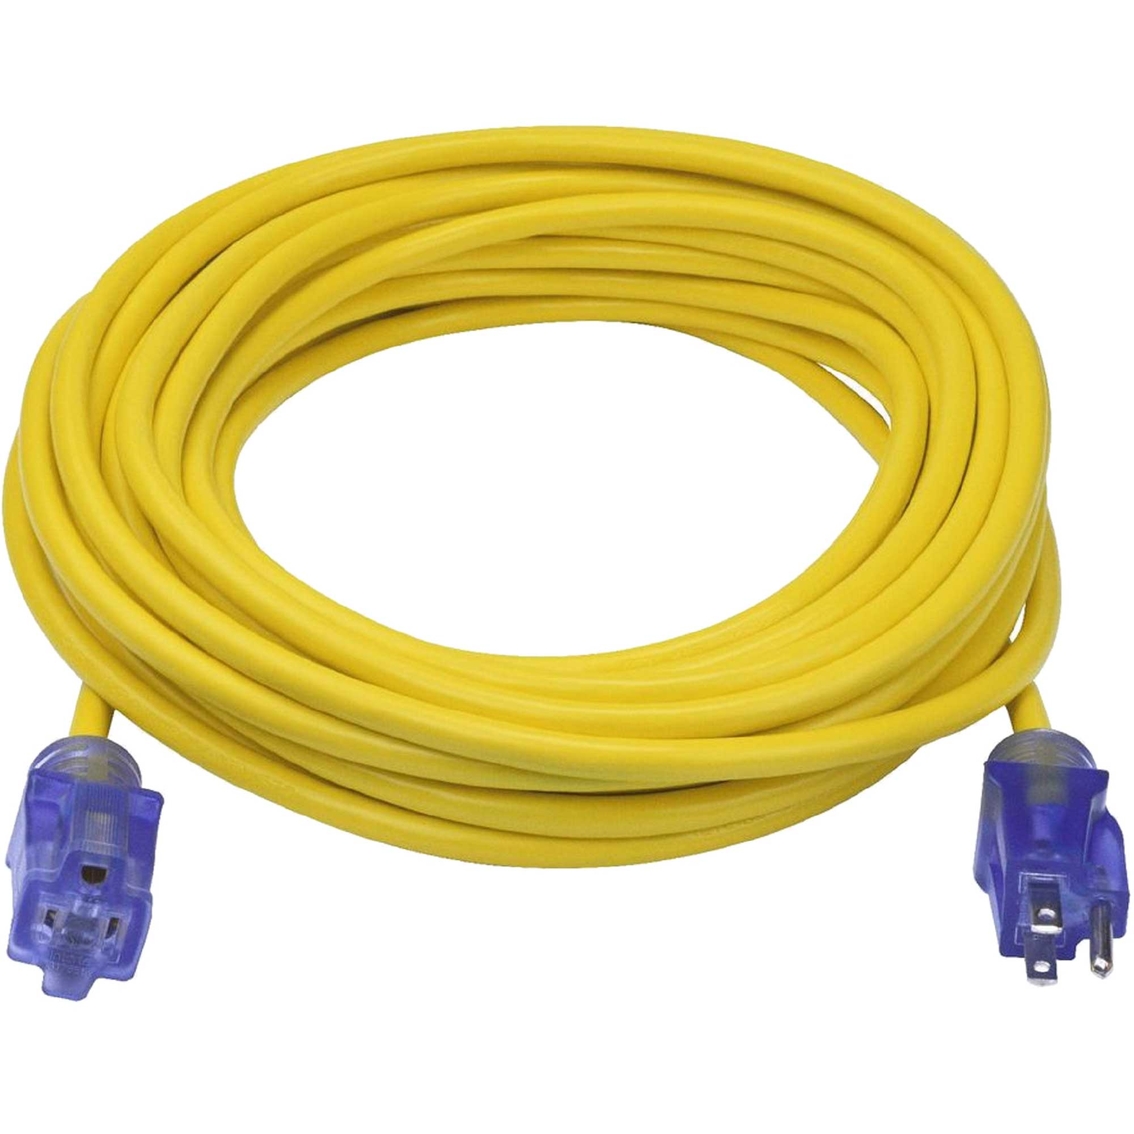 Prime Wire & Cable 50 ft. Outdoor Extension Cord with Locking & Lighted Connector - Image 2 of 2